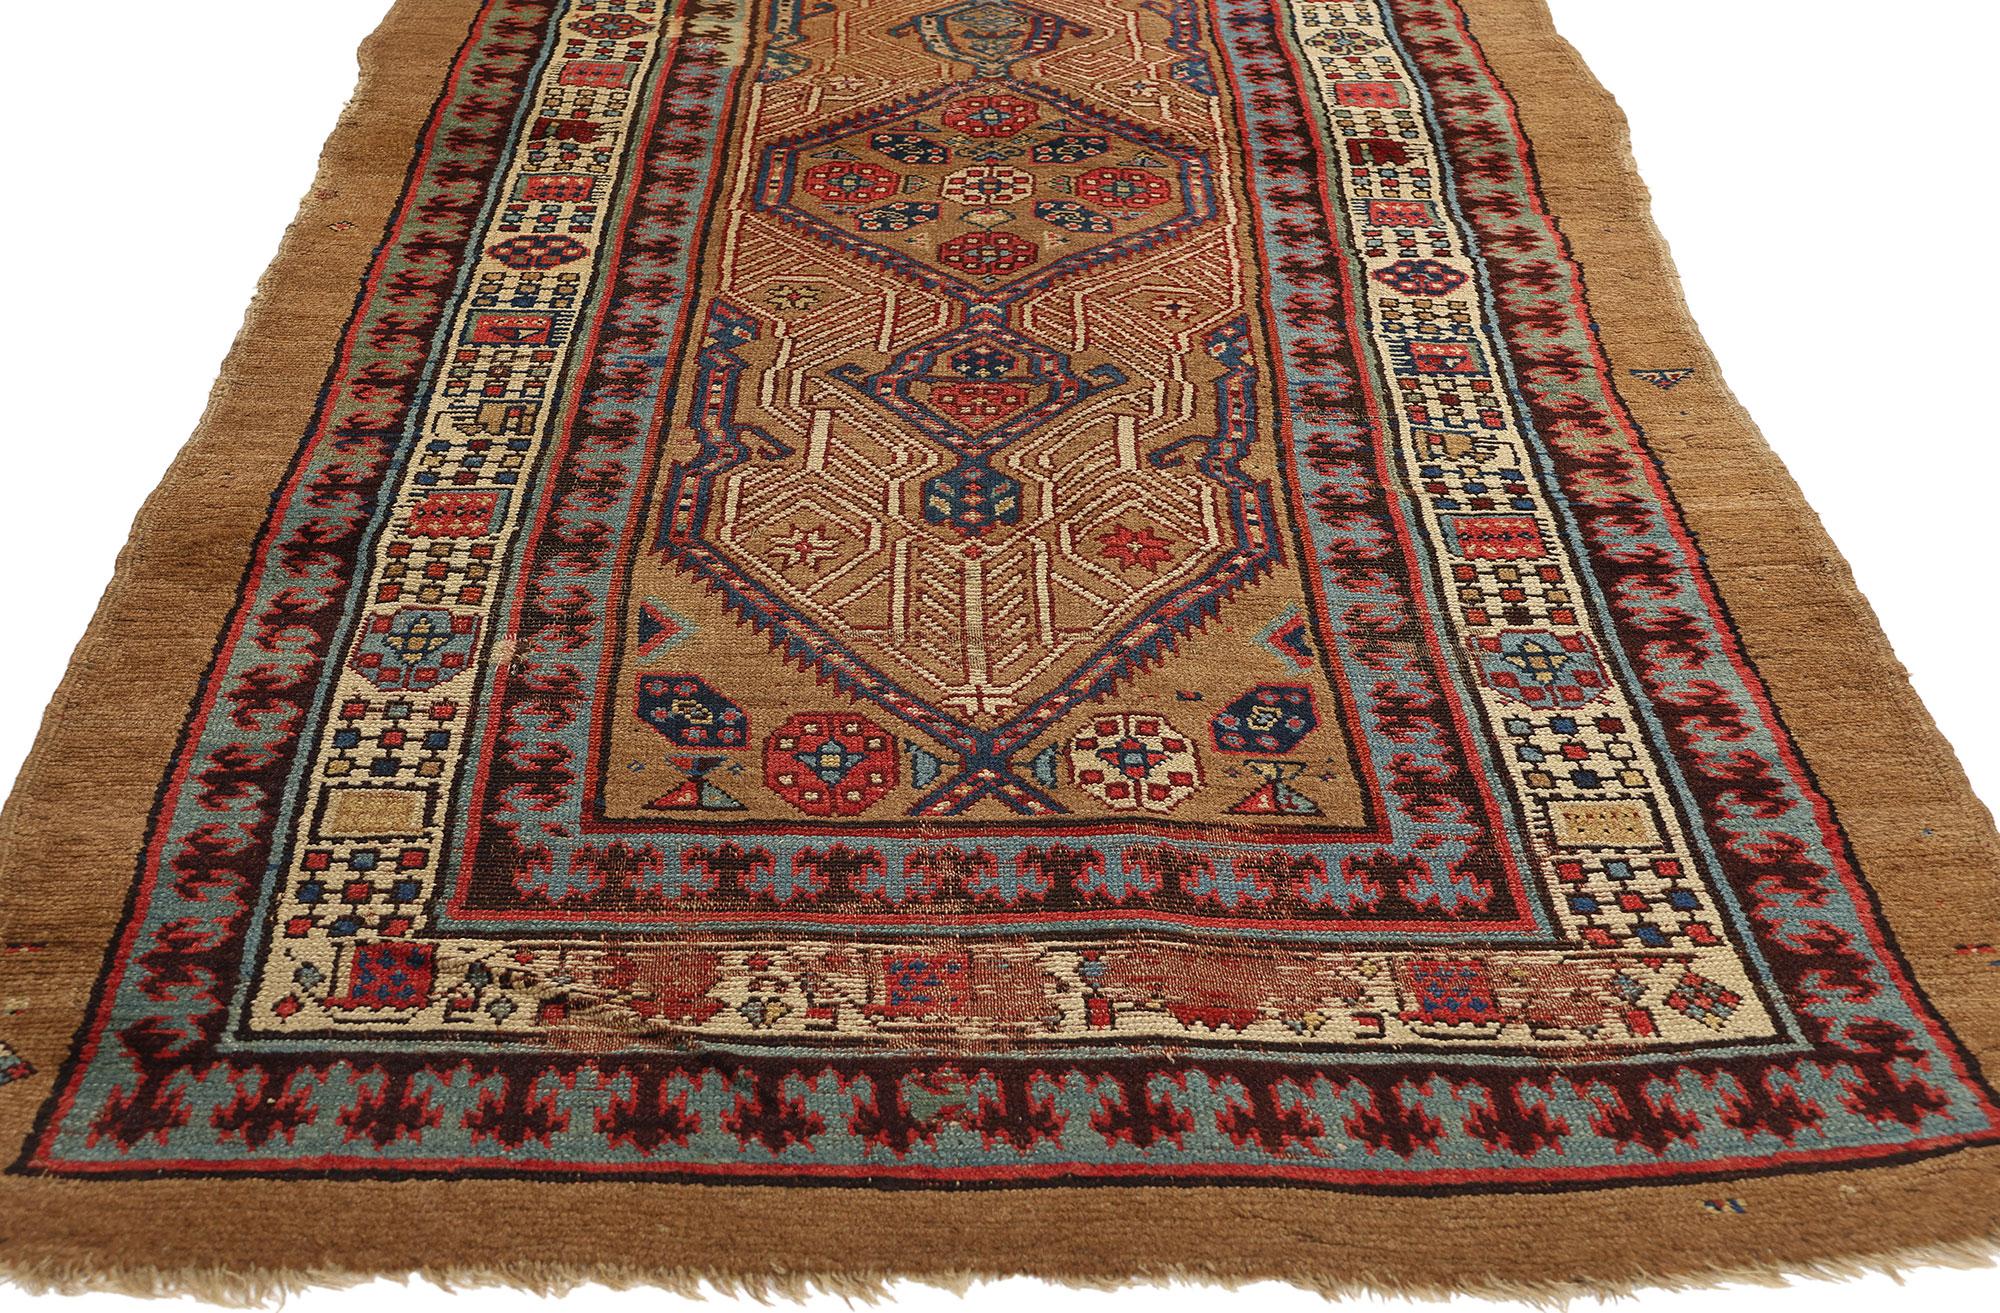 73708 Antique Persian Malayer Rug Runner, 03’08 x 11’06. Persian Malayer carpet runners are long, narrow rugs handcrafted in the Malayer region of western Iran. These runners typically feature intricate designs such as geometric patterns, floral